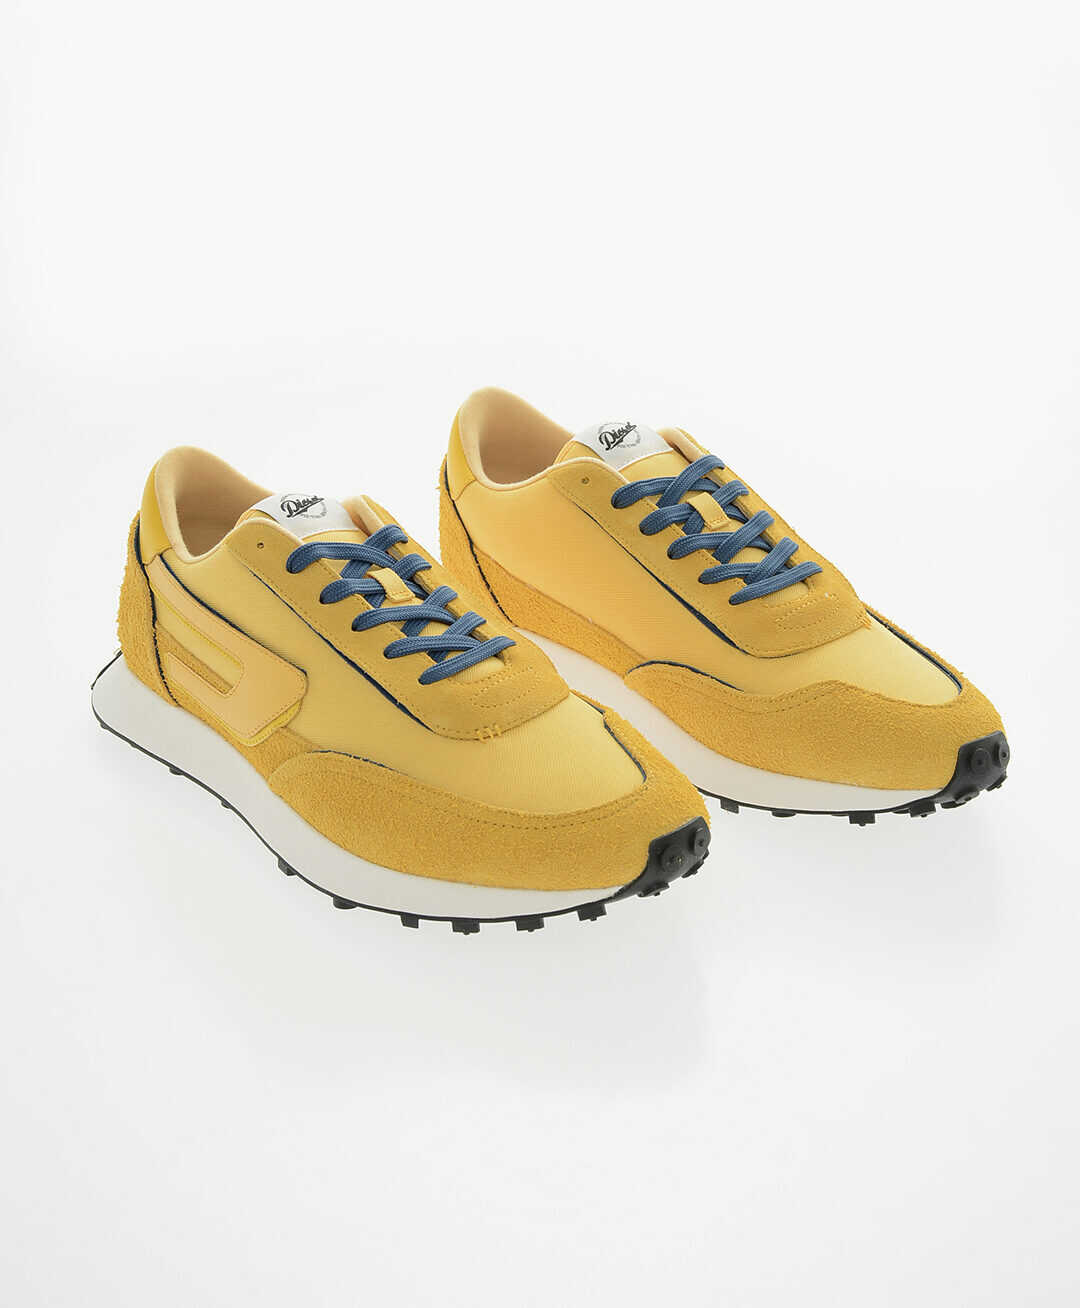 Diesel Tone- On Ton Mesh And Suede S-Racer Lc Low-Top Sneakers With Yellow